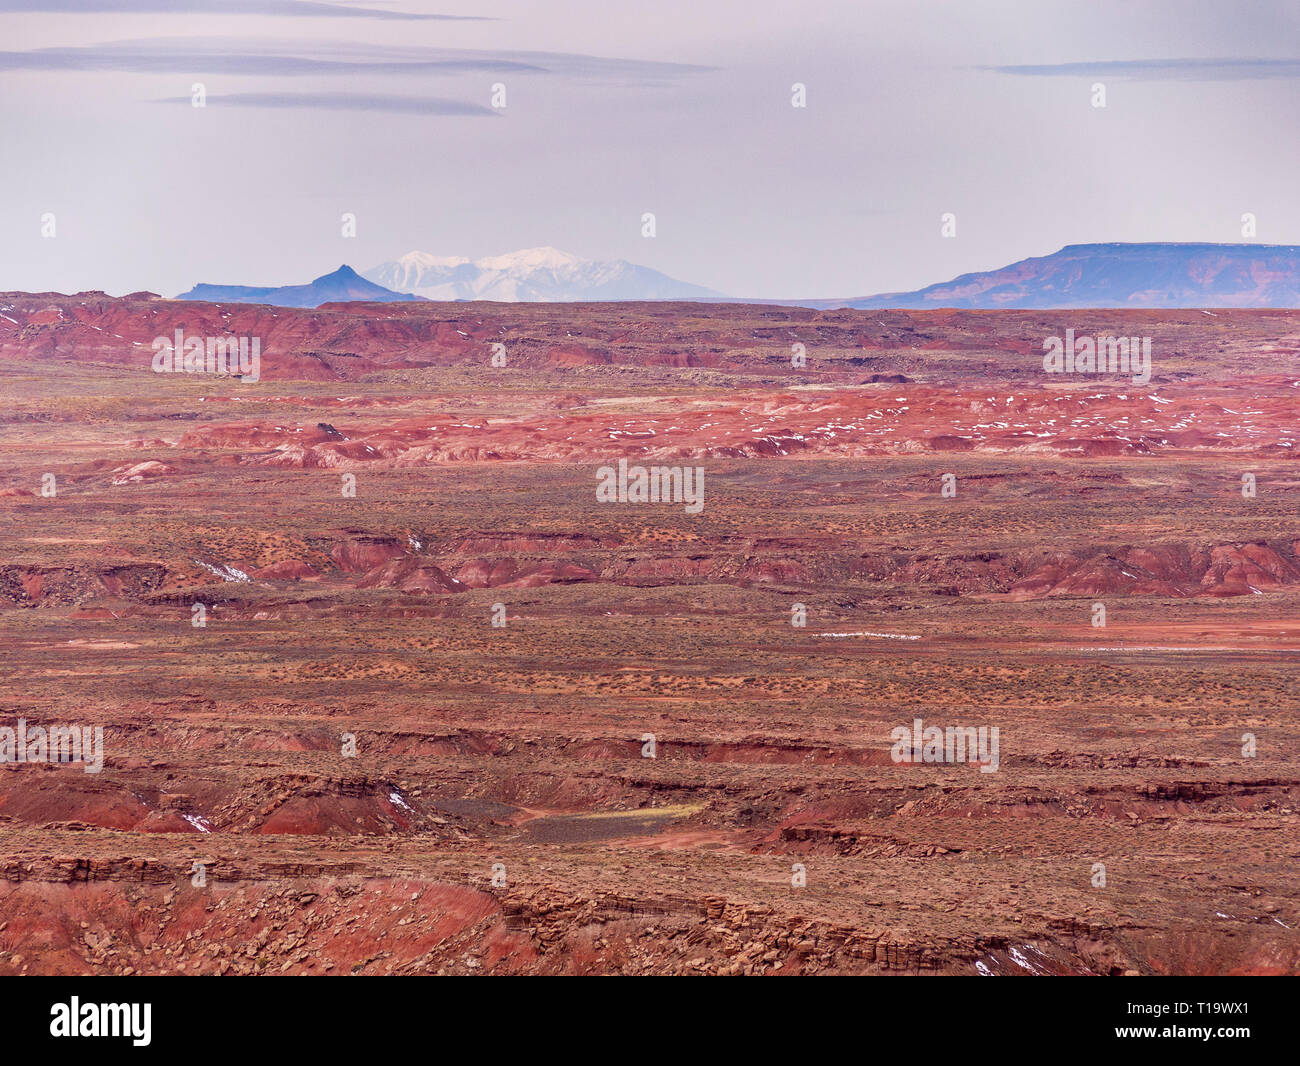 View of the Painted Desert from Pintado Point, Petrified Forest National Park. San Francisco Peaks on horizon over 100 miles away, base below horizon. Stock Photo